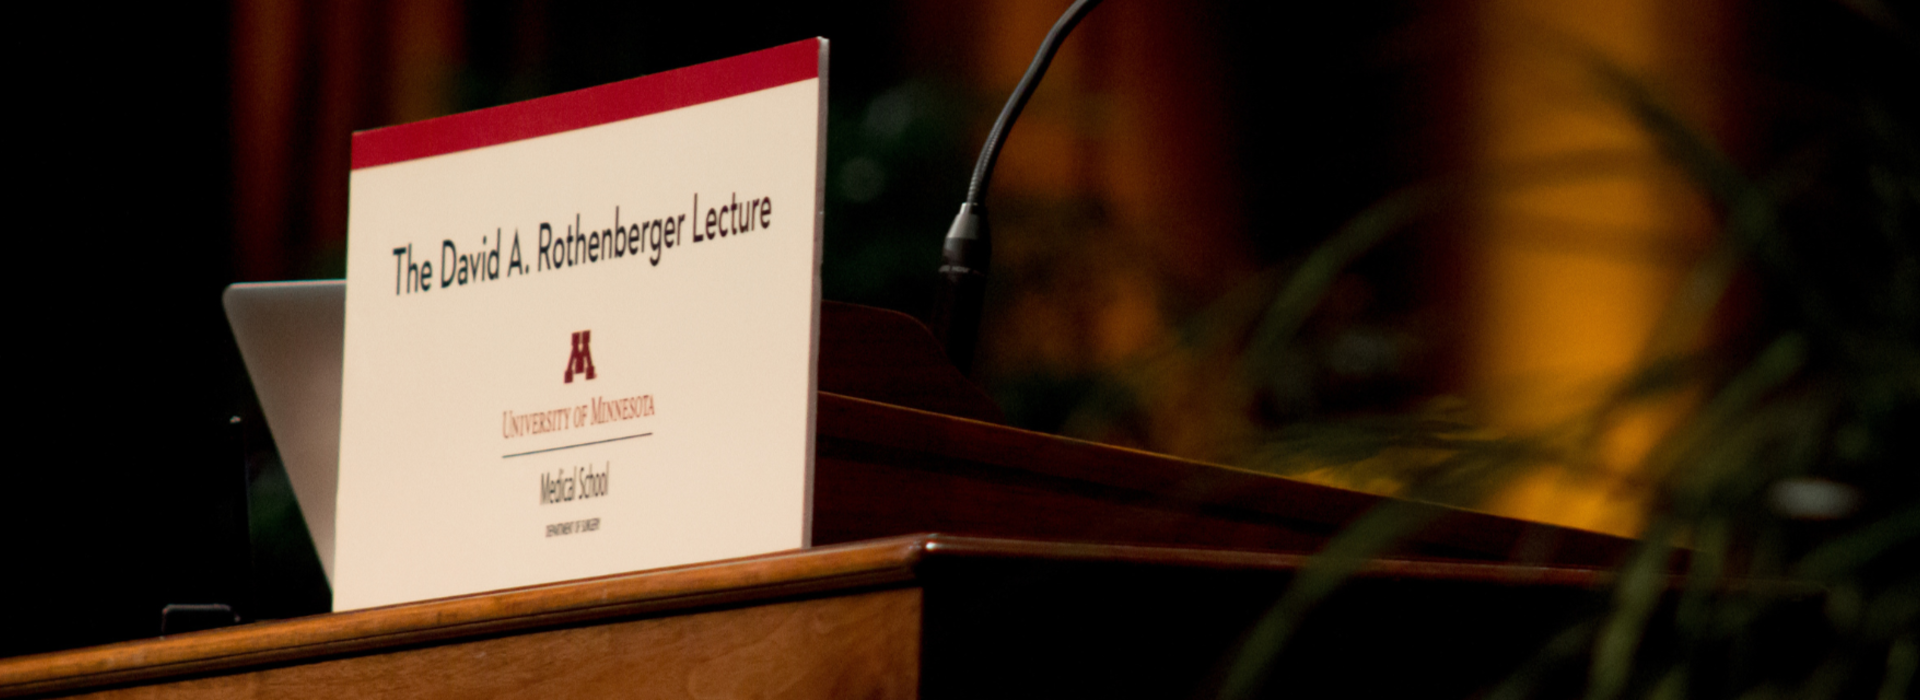 ROTHENBERGER LECTURE